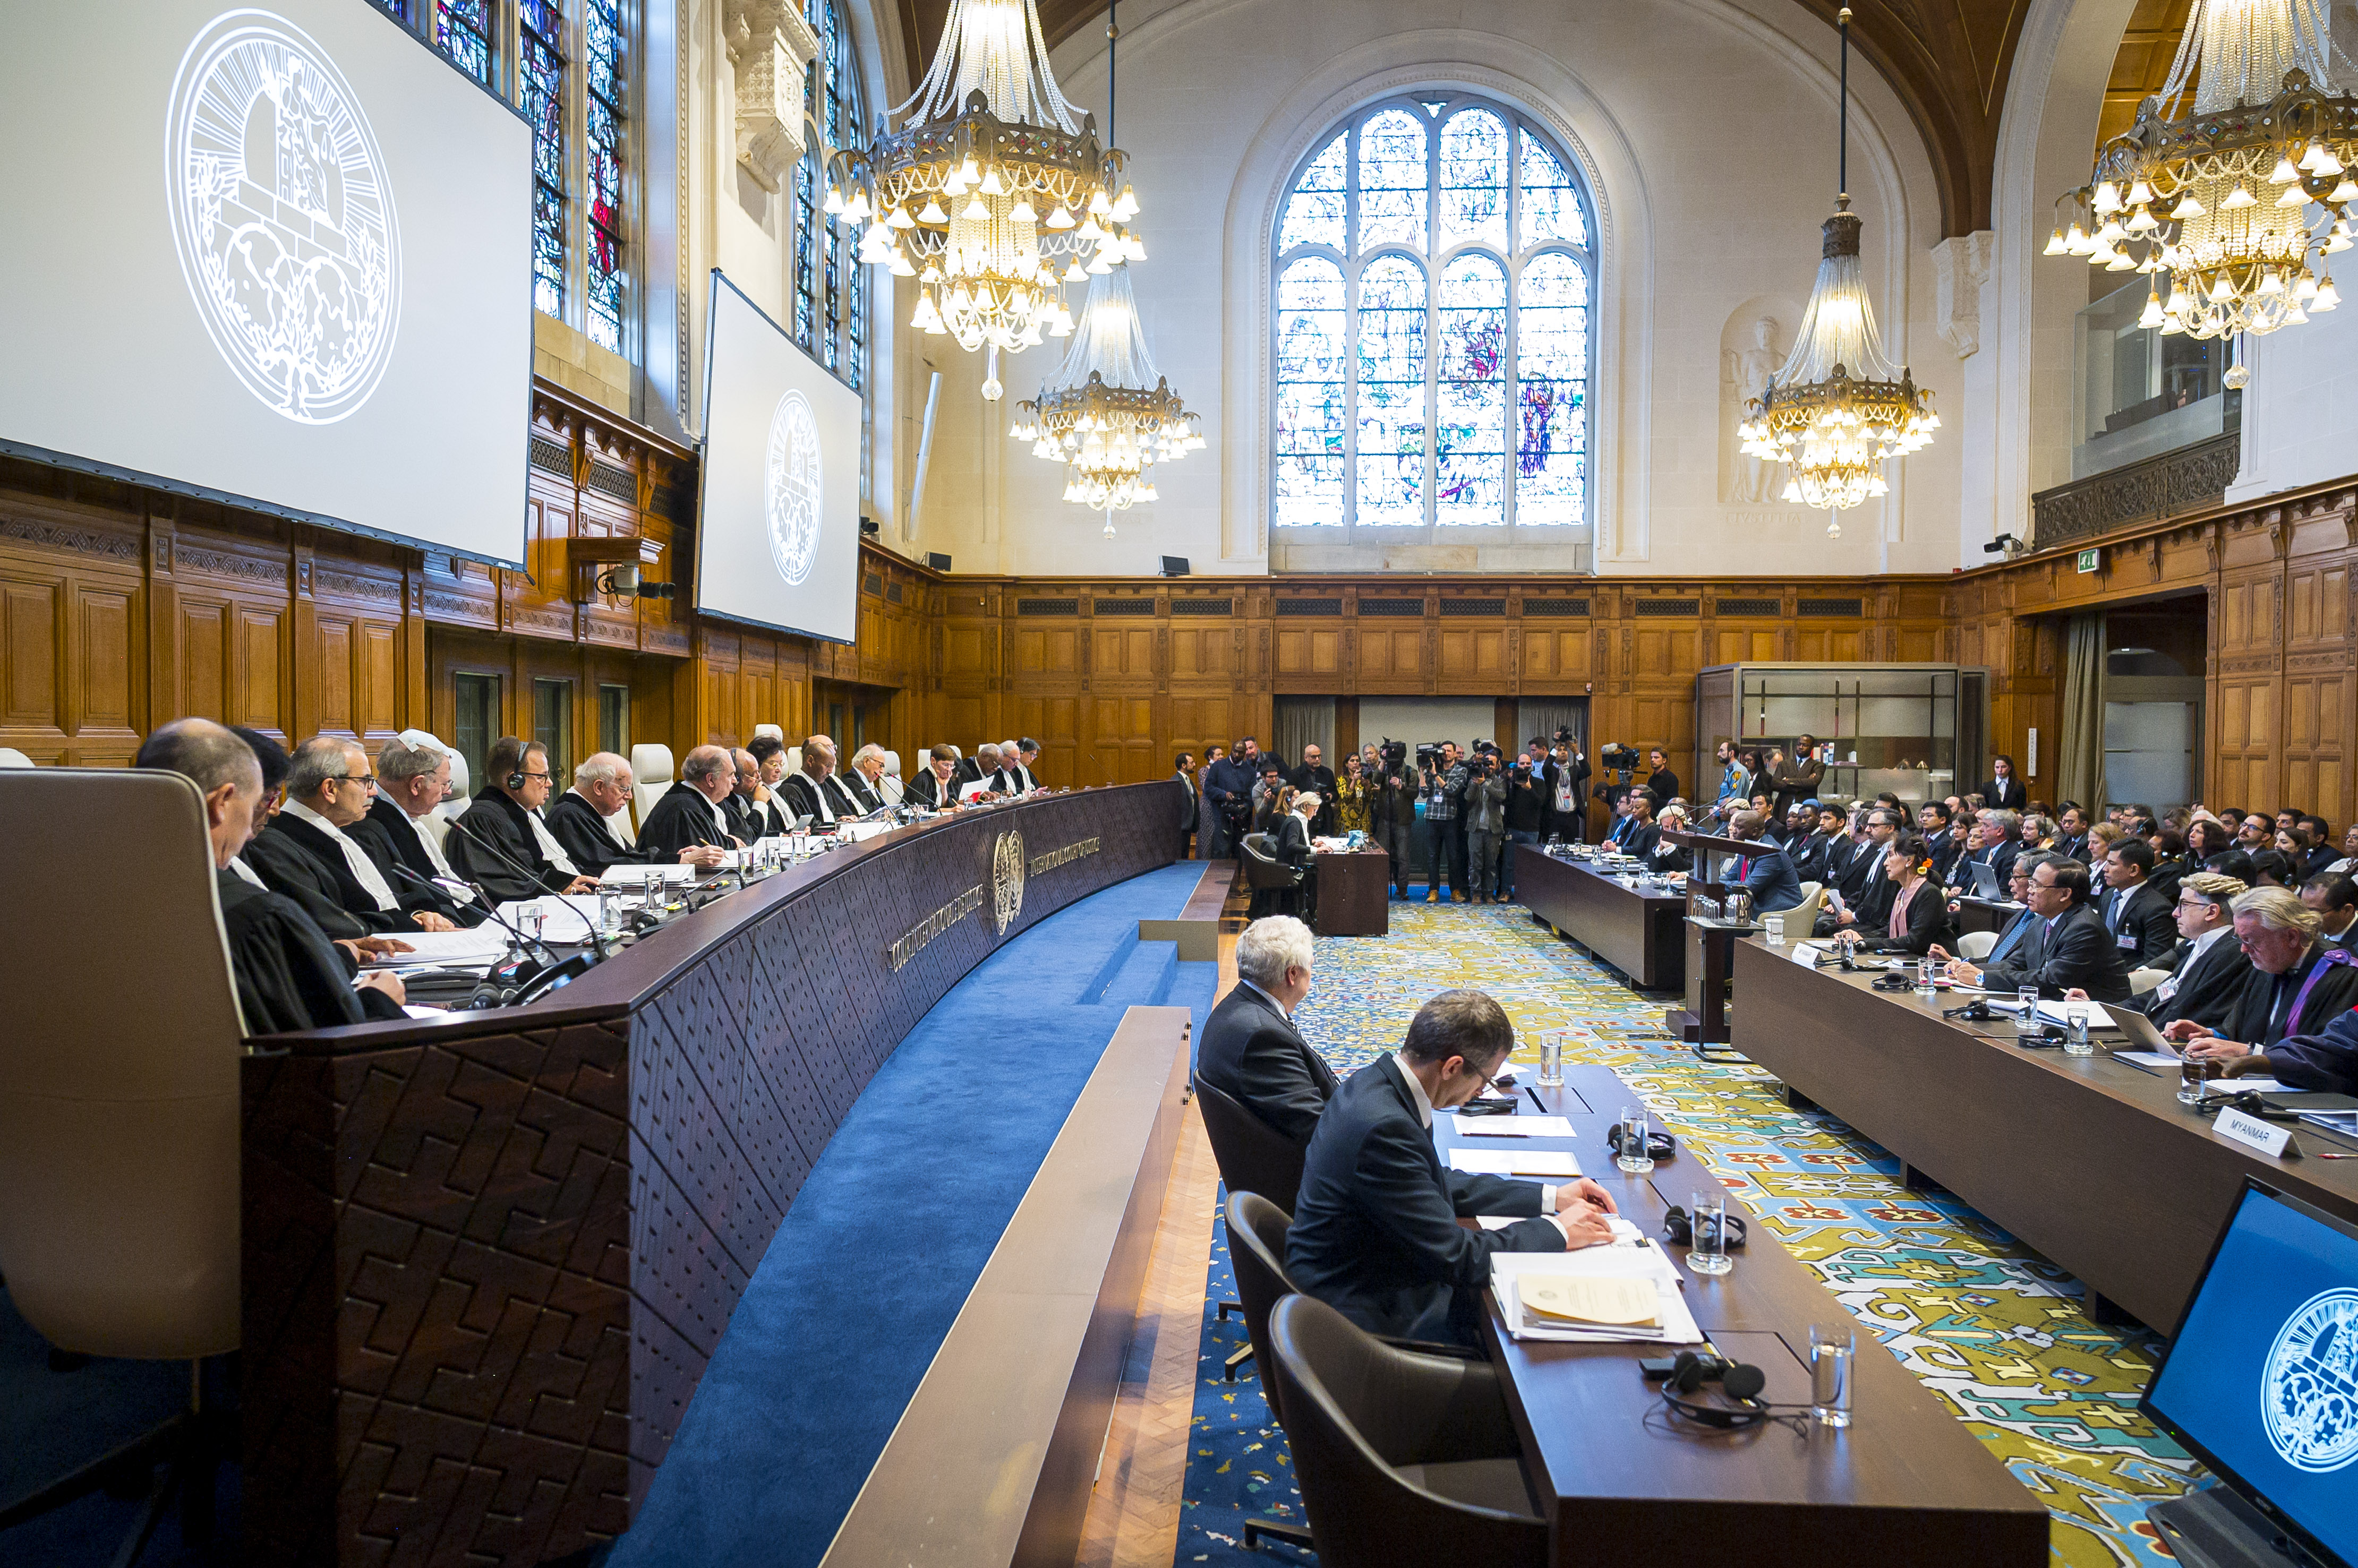 ICJ General Presentation Gallery (ICJ Film, Official Pictures and videos) | International Court of Justice